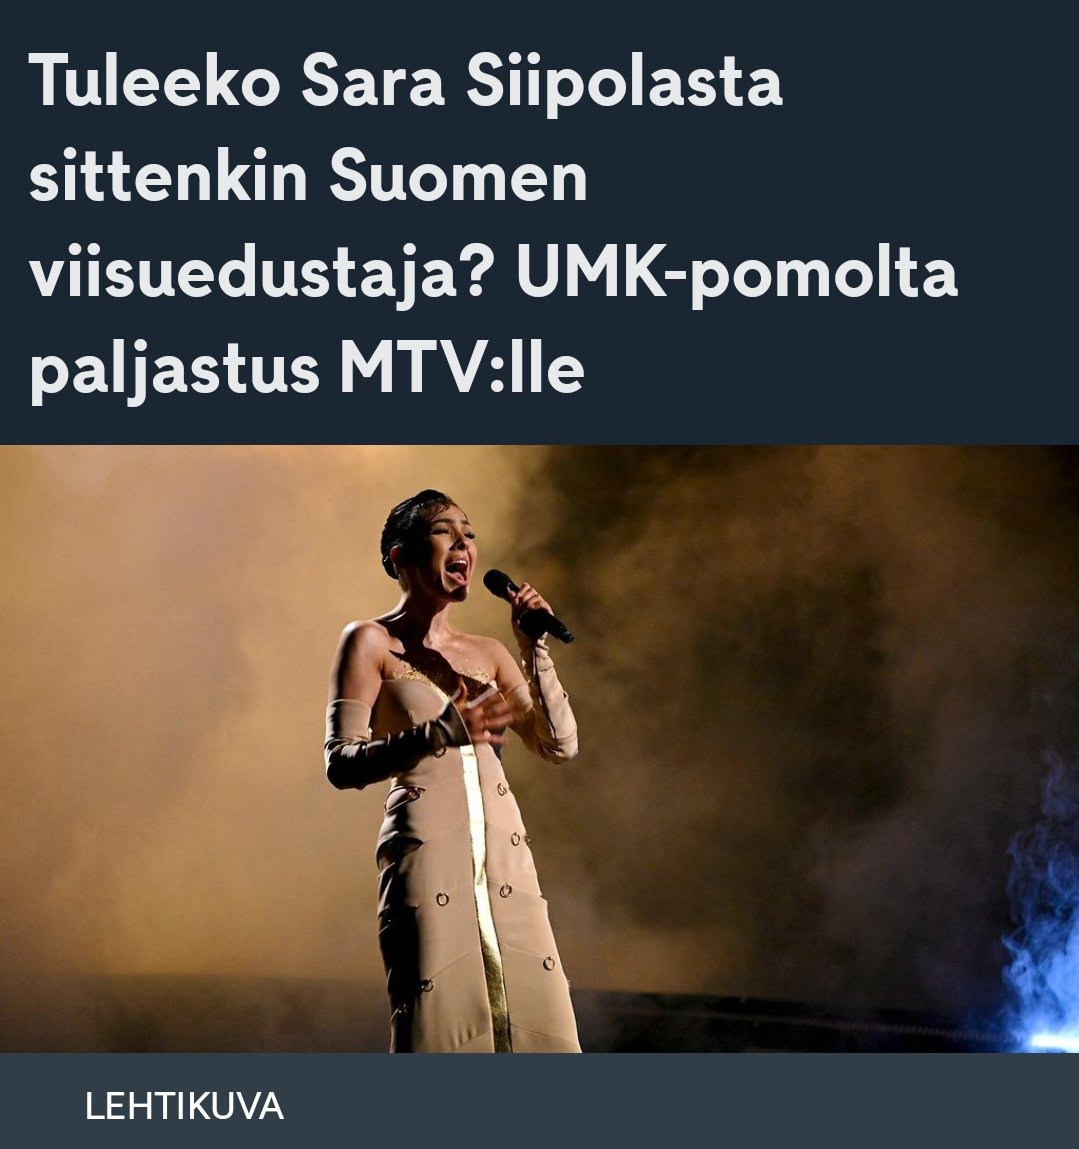 It has been confirmed that the 'back-up plan' is to ask the other #UMK24 participants to go